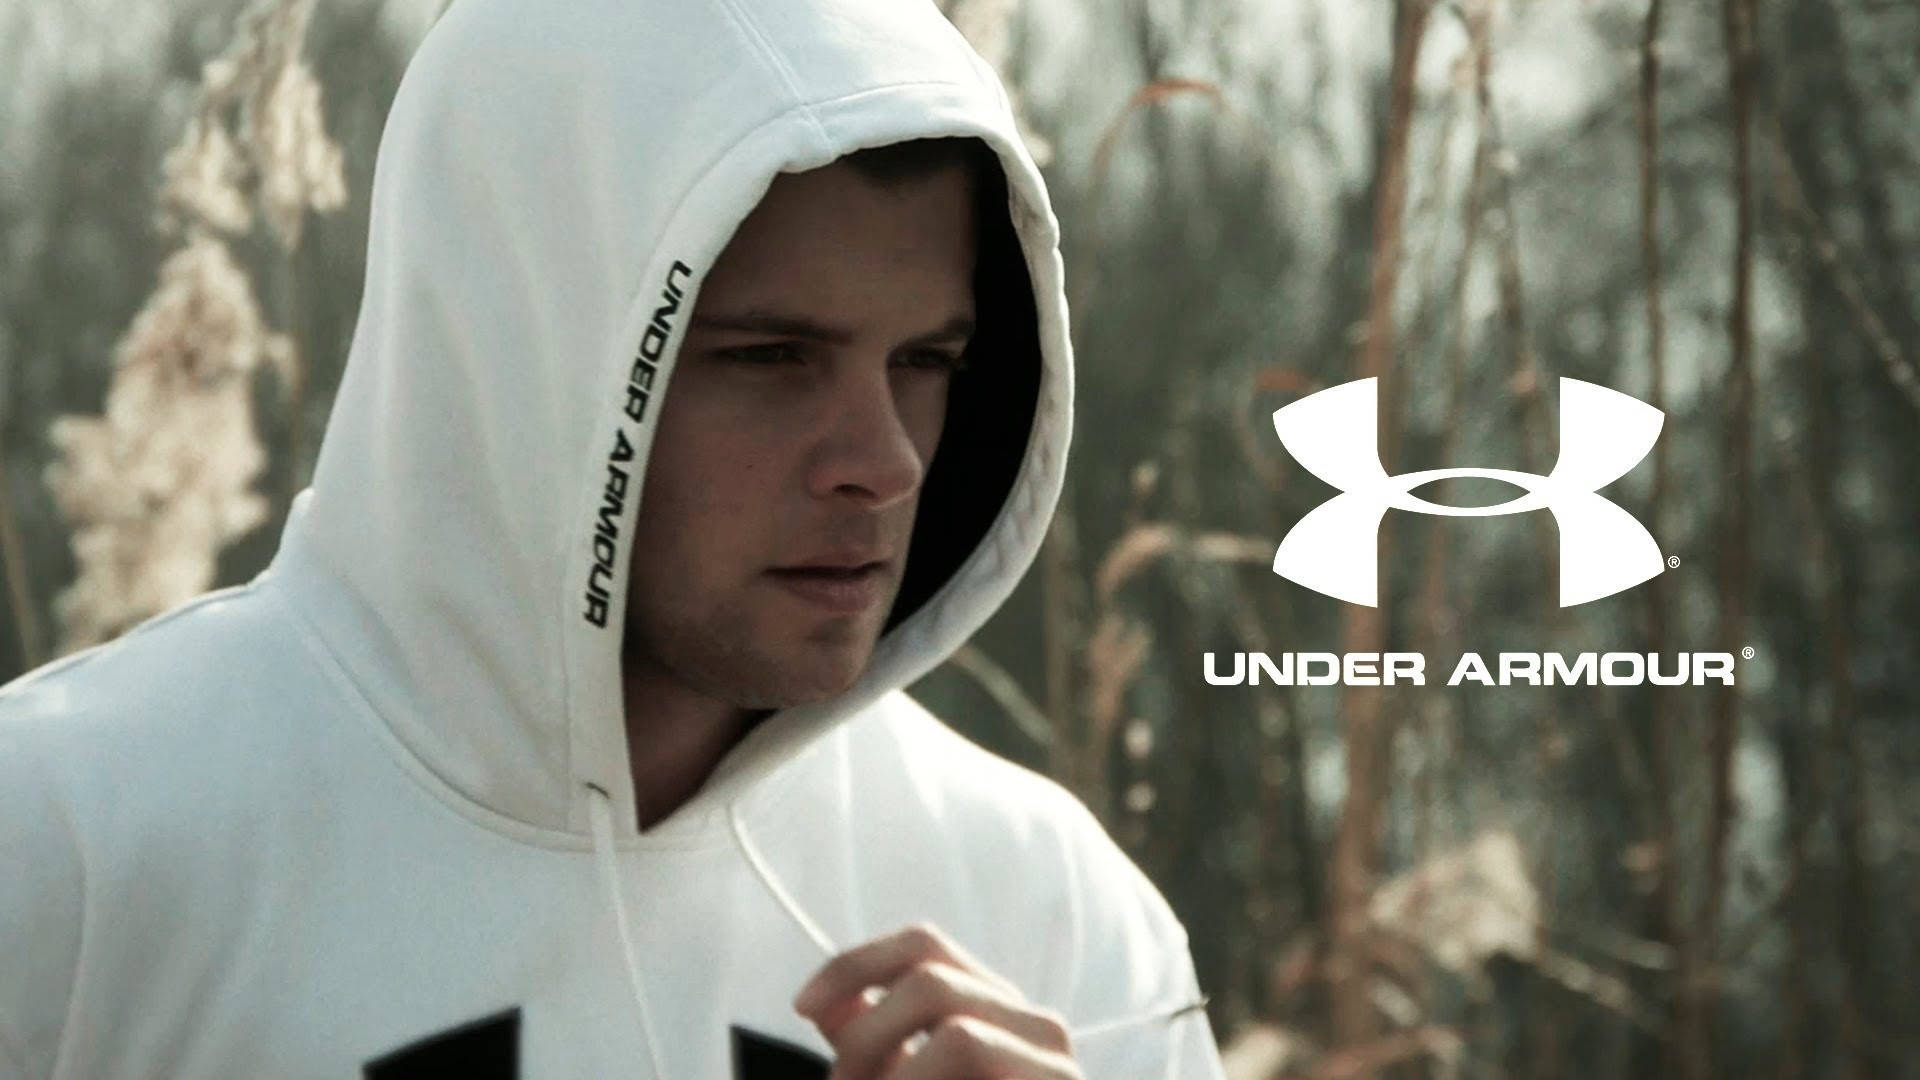 Under Armour Promotional Poster Background